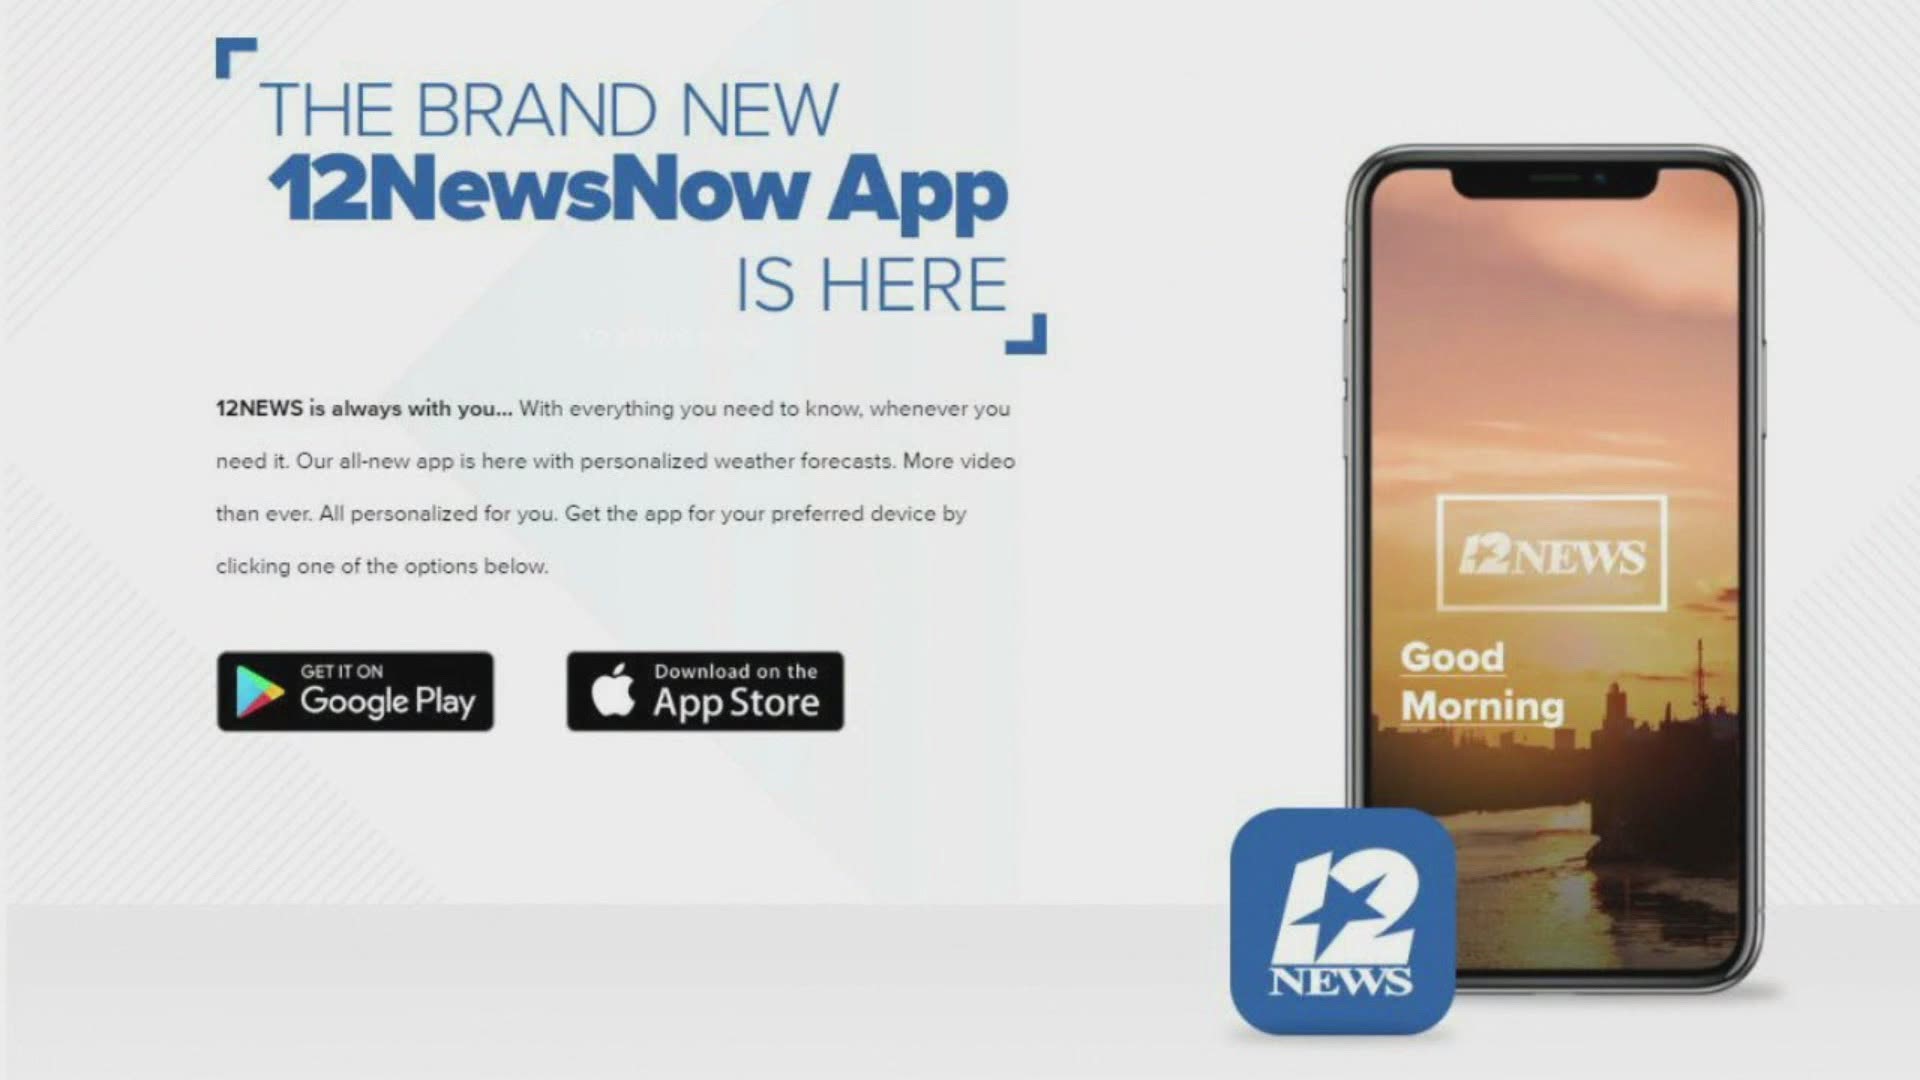 Download the new 12NewsNow App at the Apple App Store and Google Play or visit https://12NewsNow.com/App on your mobile device!